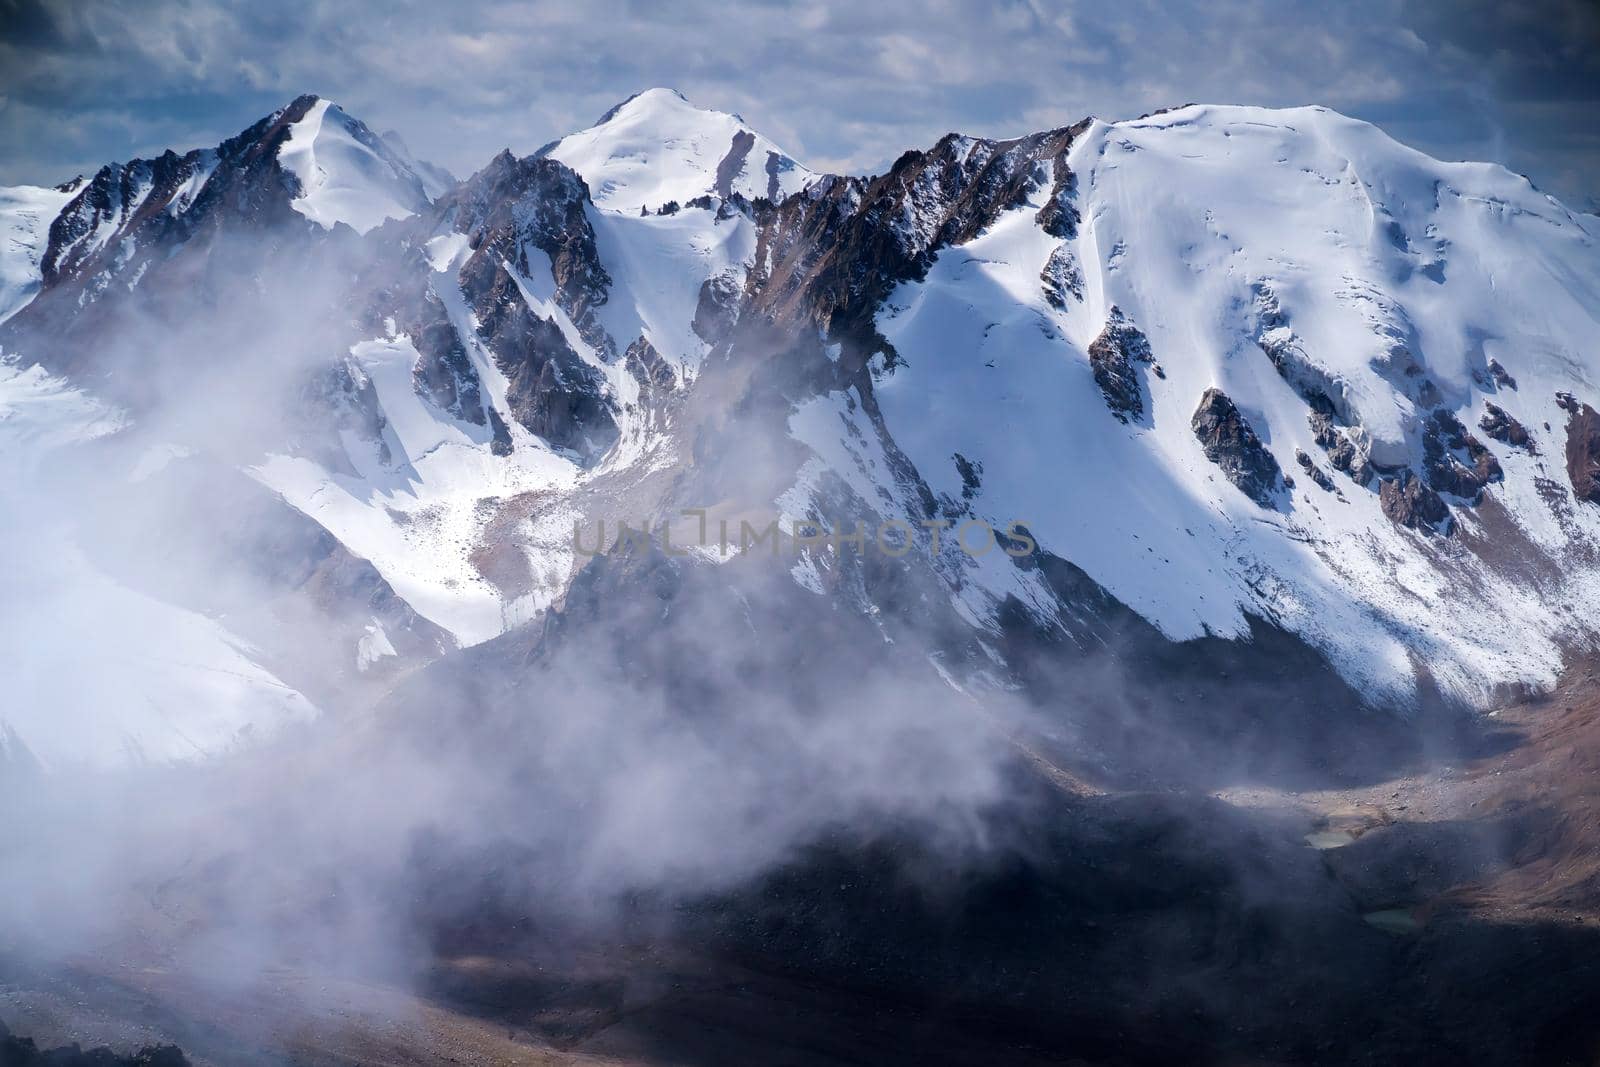 Highlands cliffs, snow-capped peaks of mighty mountains in the clouds, a stunning view from above